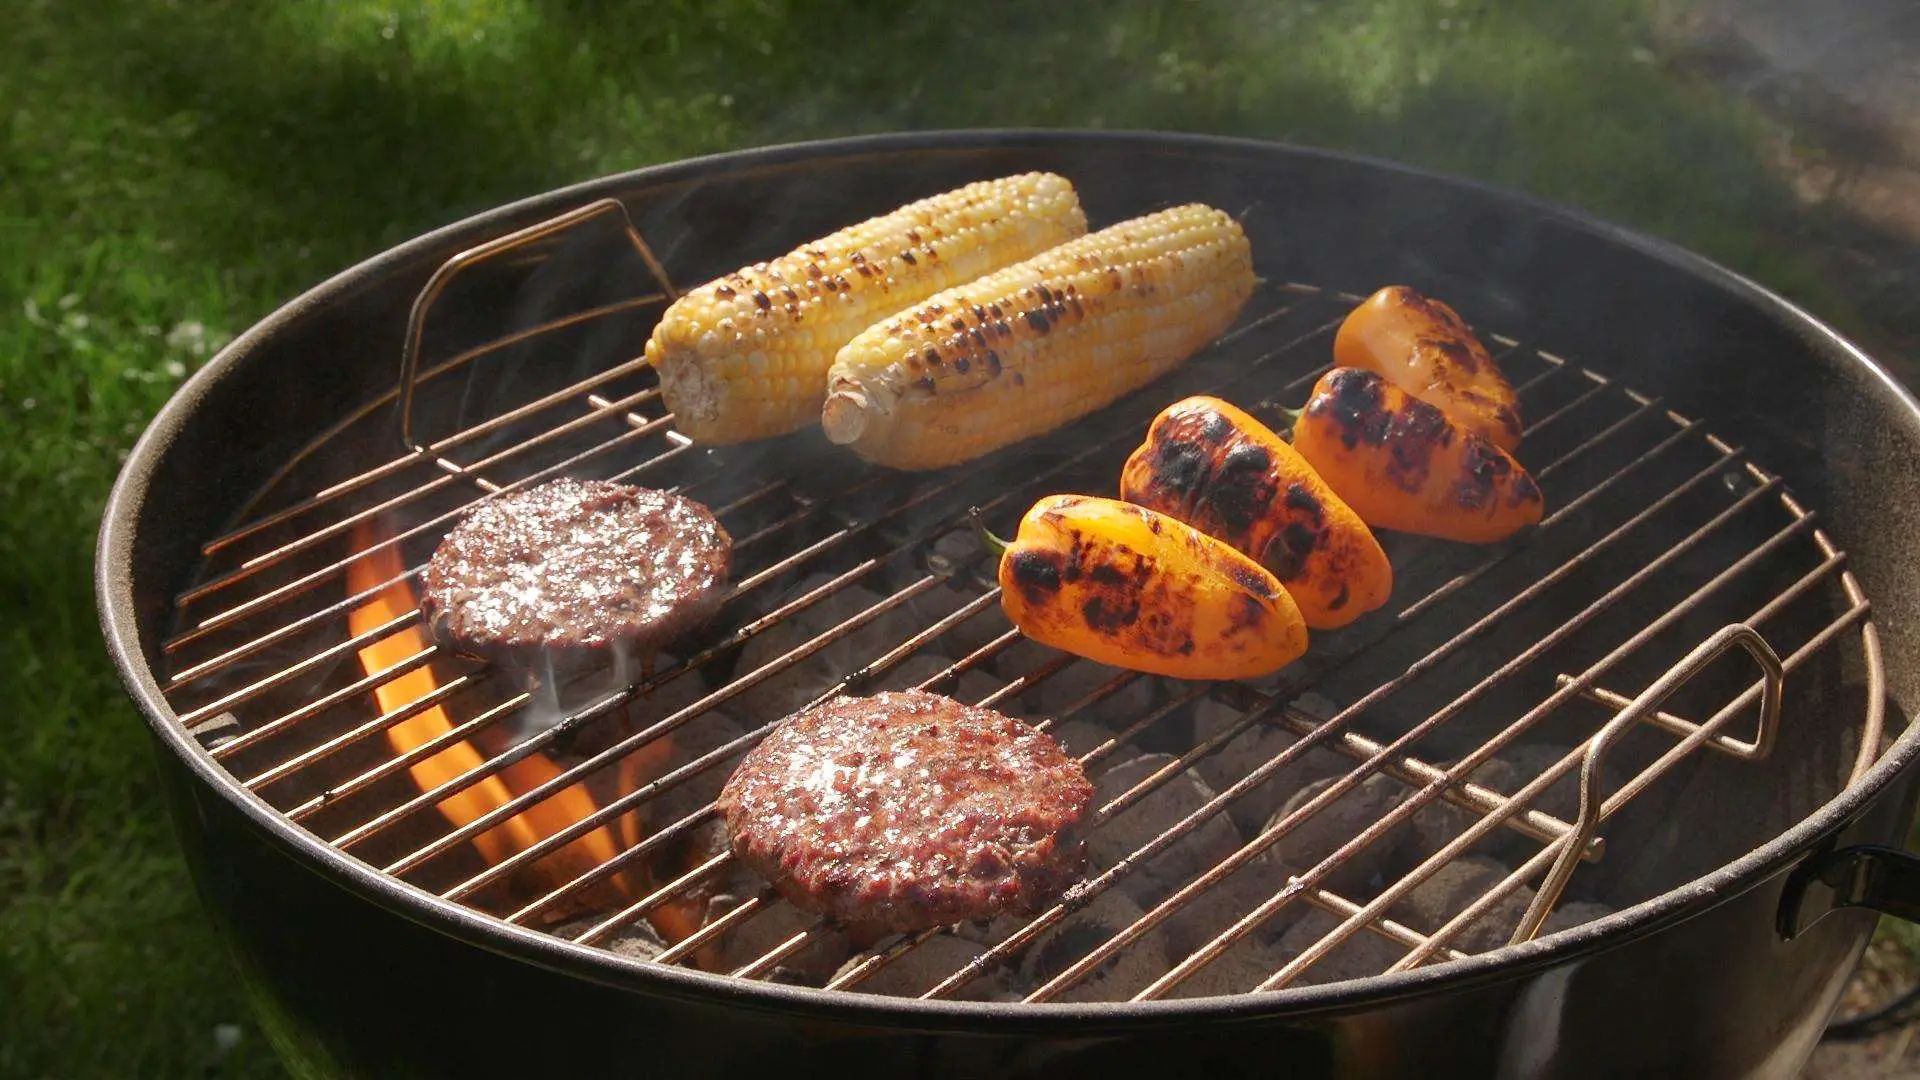 How to Cook on a Charcoal Grill